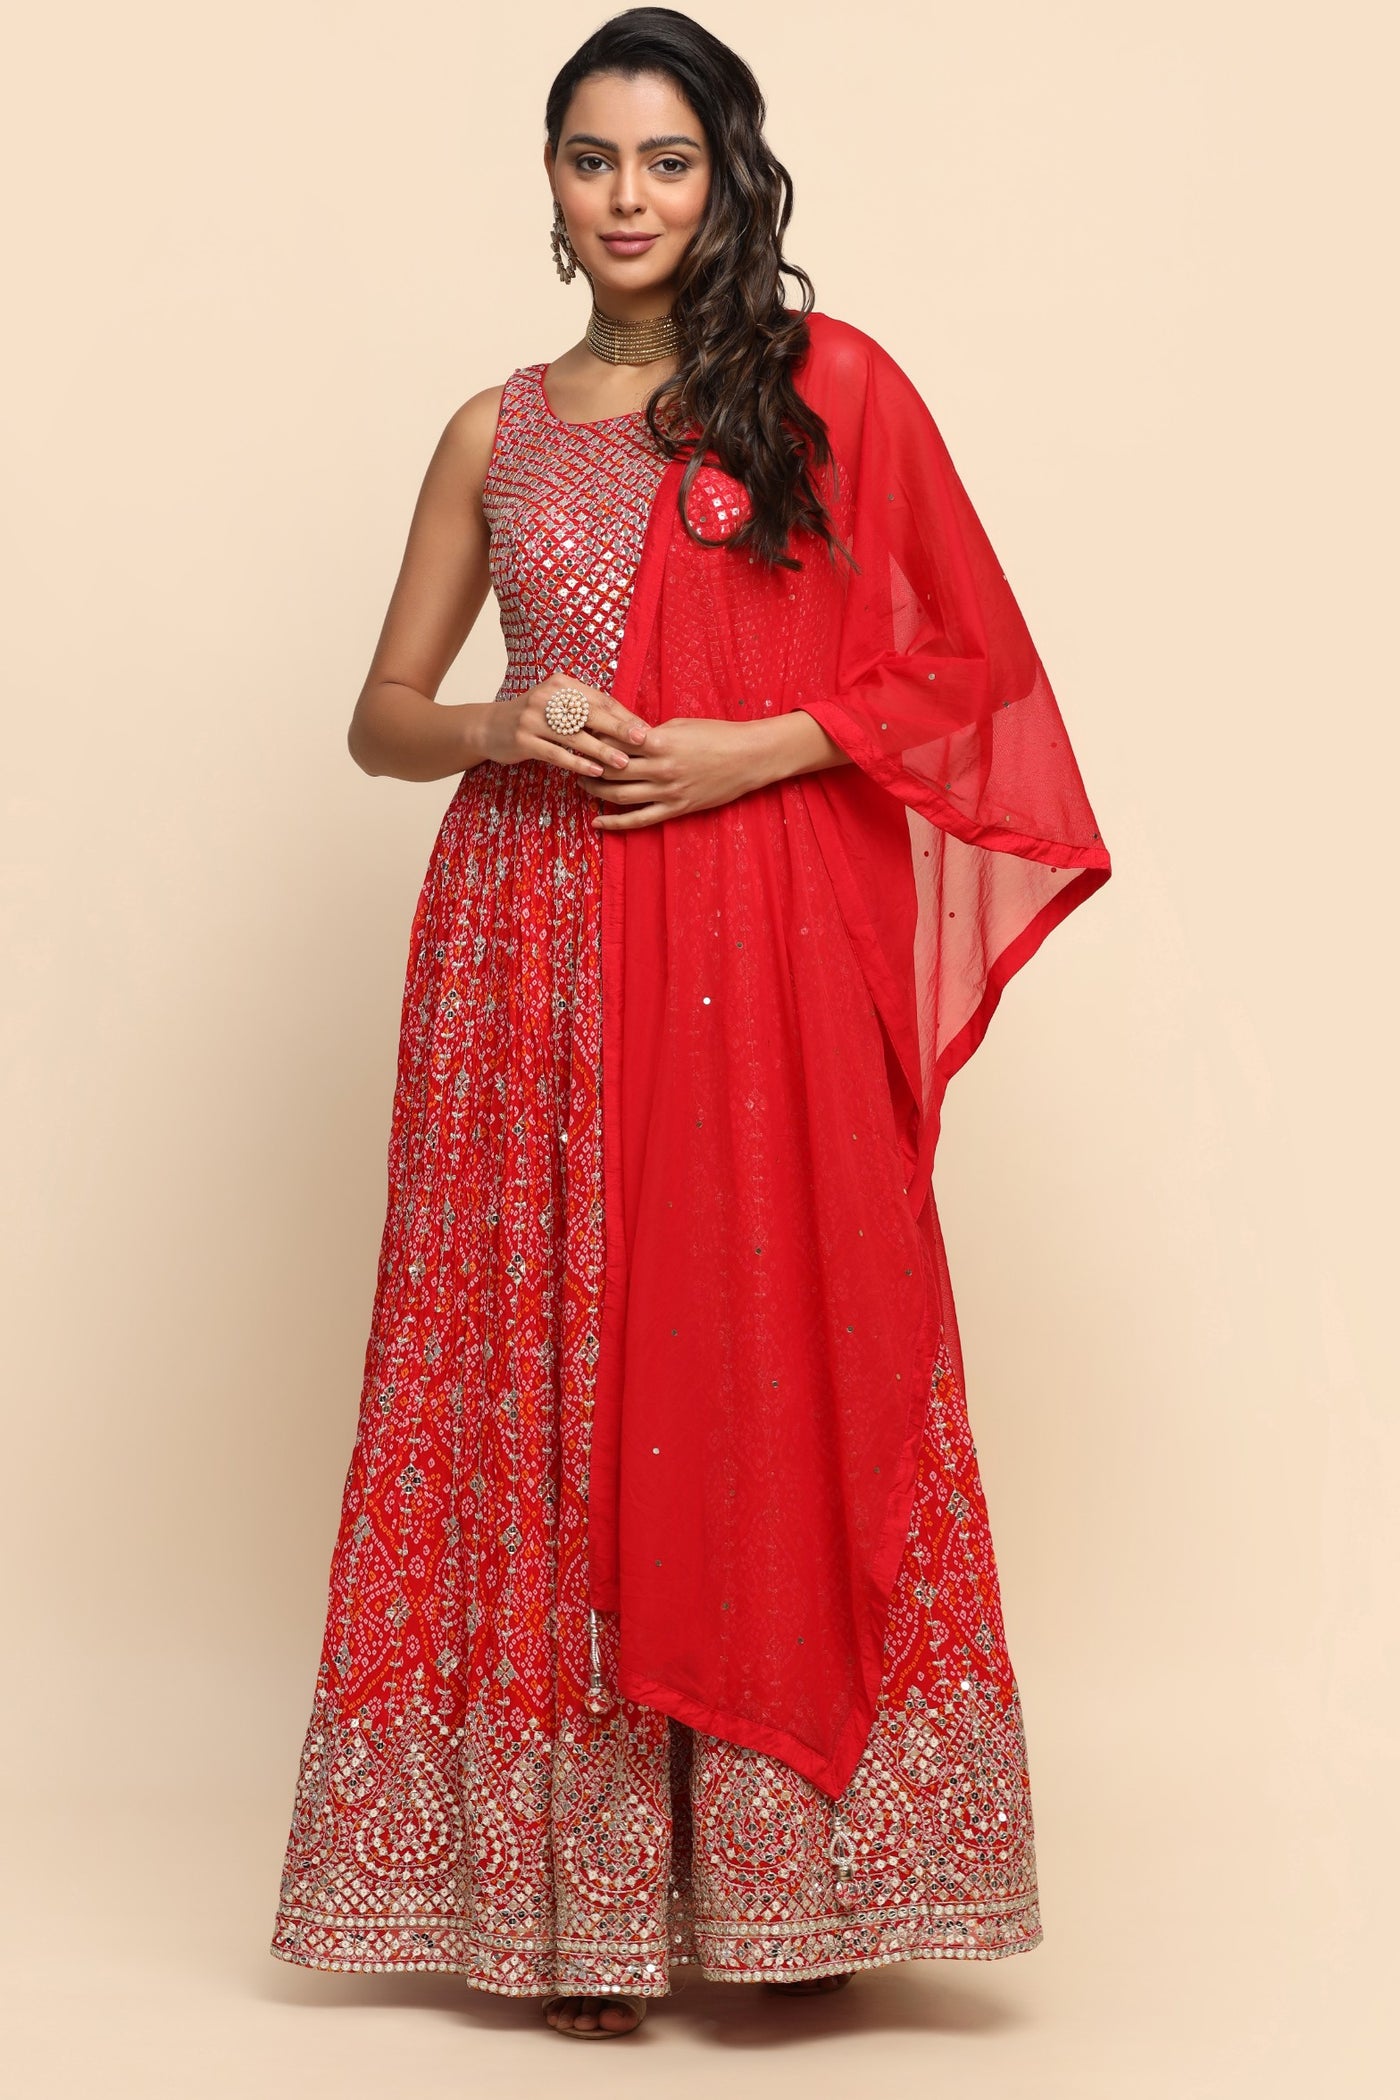 Classy Red color bandhej printed and embroidered dress